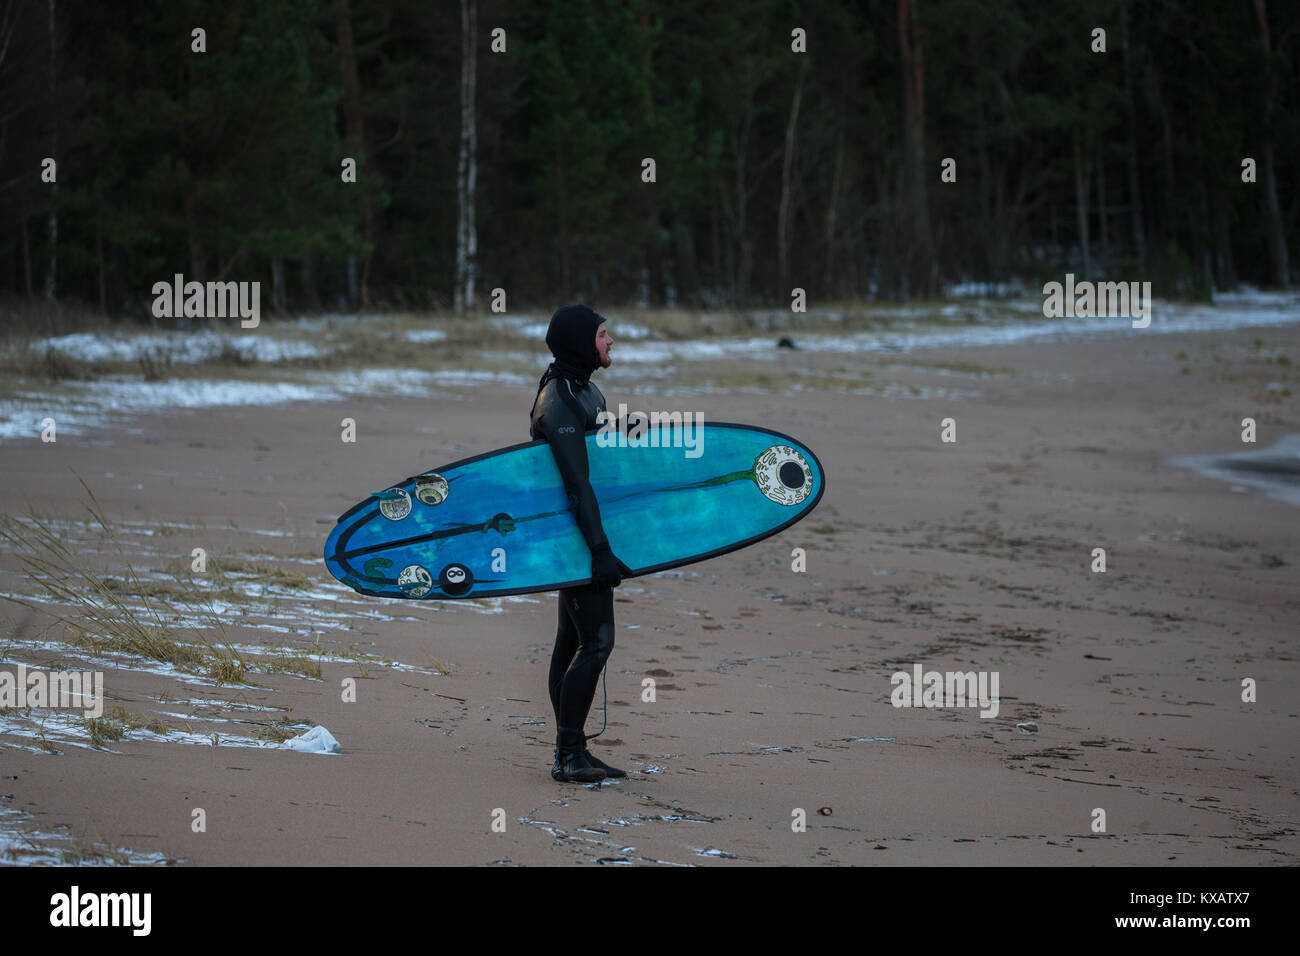 Leningrad Oblast, Russia. 8th January, 2018. Strong northerly-west gale force winds produce rough seas at Gulf of Finland, near Saint Petersburg. Surfers make the most of the waves off Bukhta Batareynaya in Leningrad Oblast today. Credit: Victor Vytolskiy/Alamy Live News Stock Photo